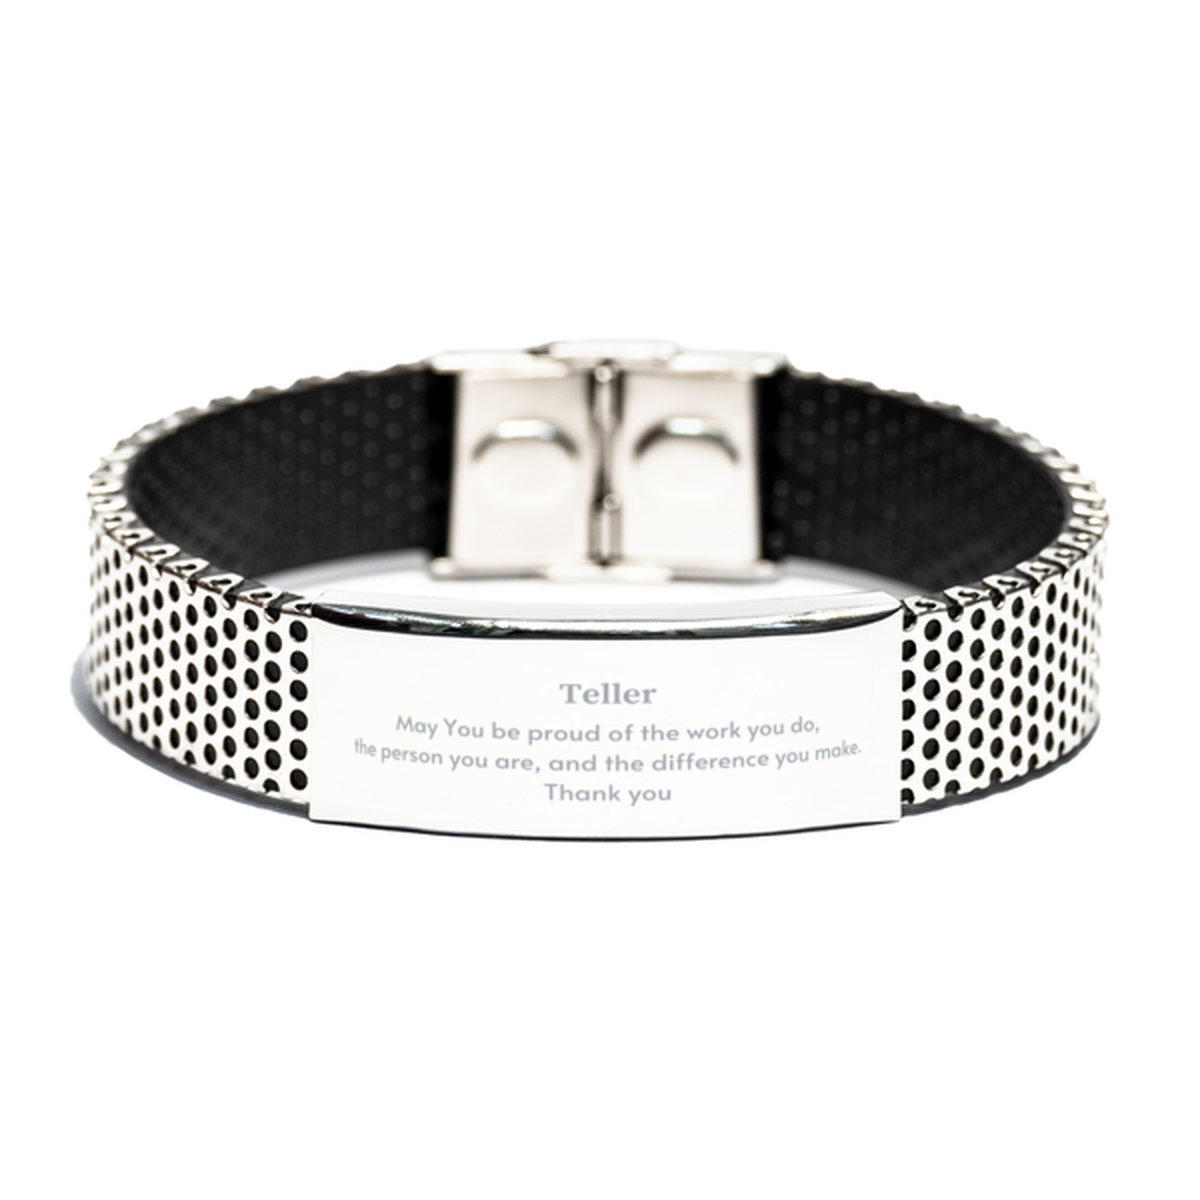 Heartwarming Stainless Steel Bracelet Retirement Coworkers Gifts for Teller, Teller May You be proud of the work you do, the person you are Gifts for Boss Men Women Friends